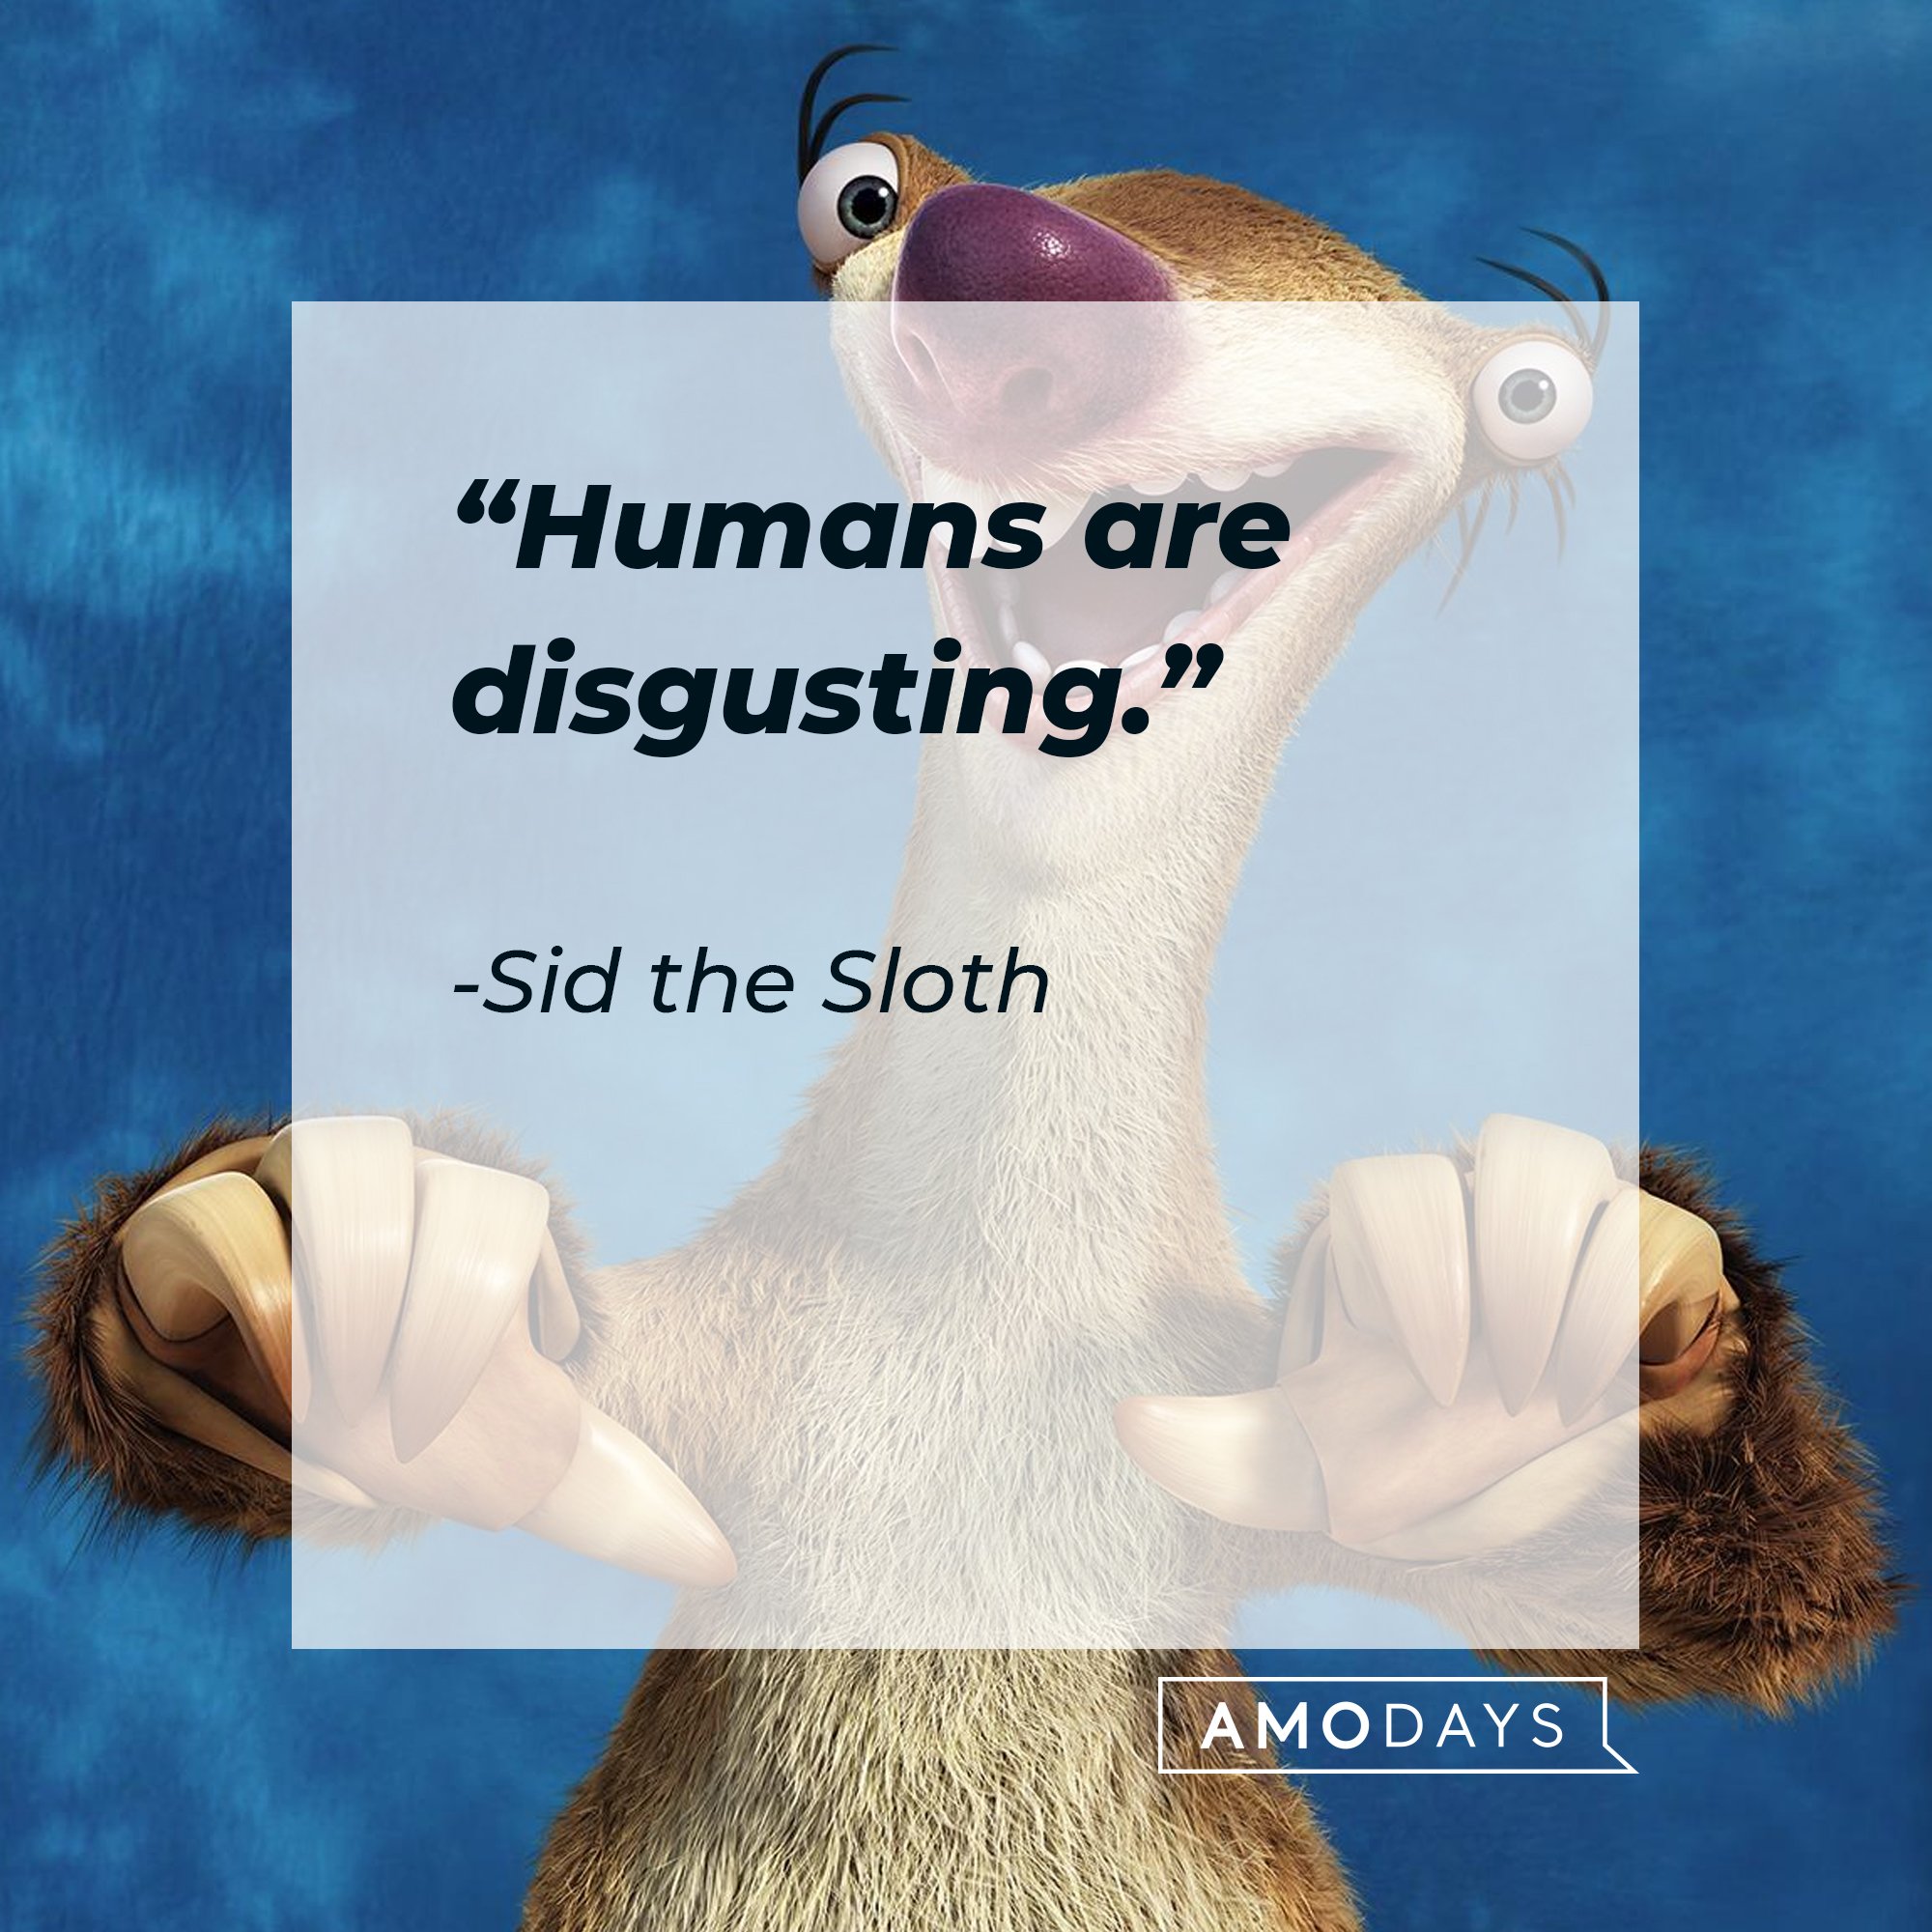 Sid the Sloth's quote: “Humans are disgusting.” | Image: AmoDays